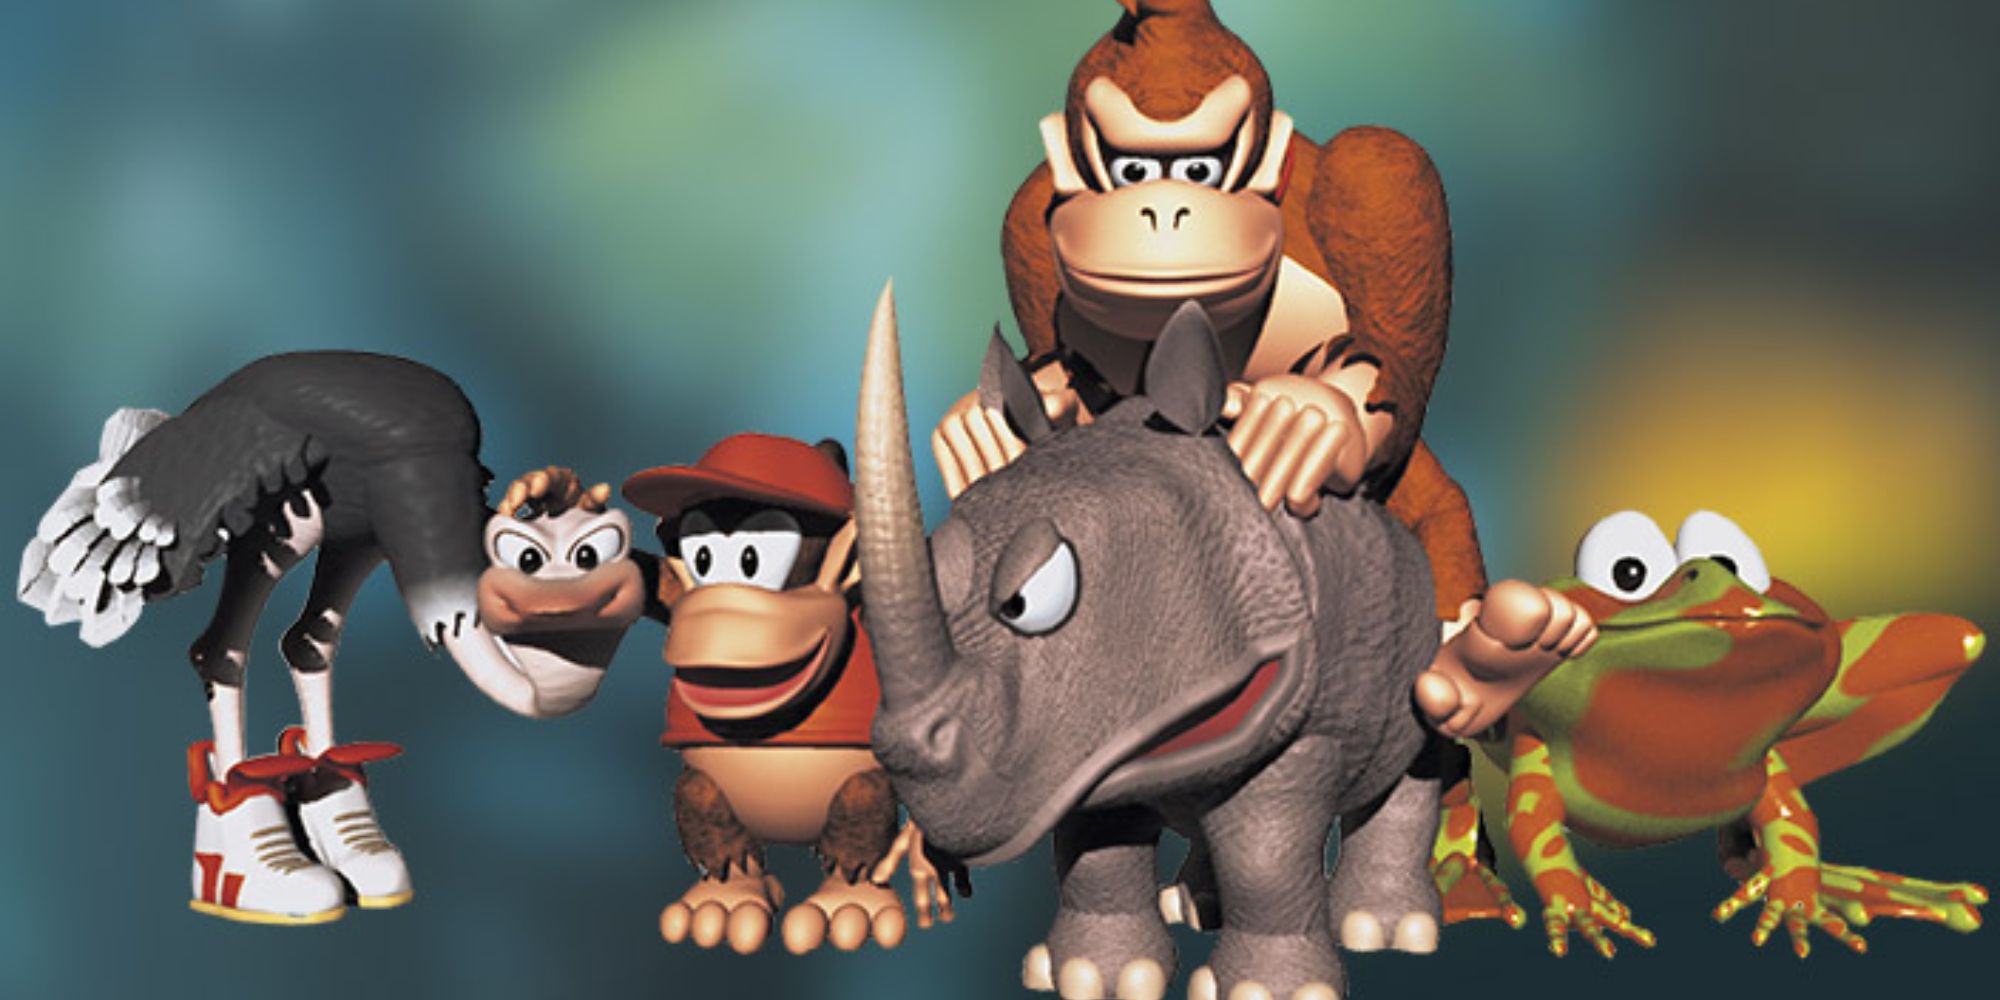 Diddy and Donkey Kong with Expresso, Winky, and Rambi.